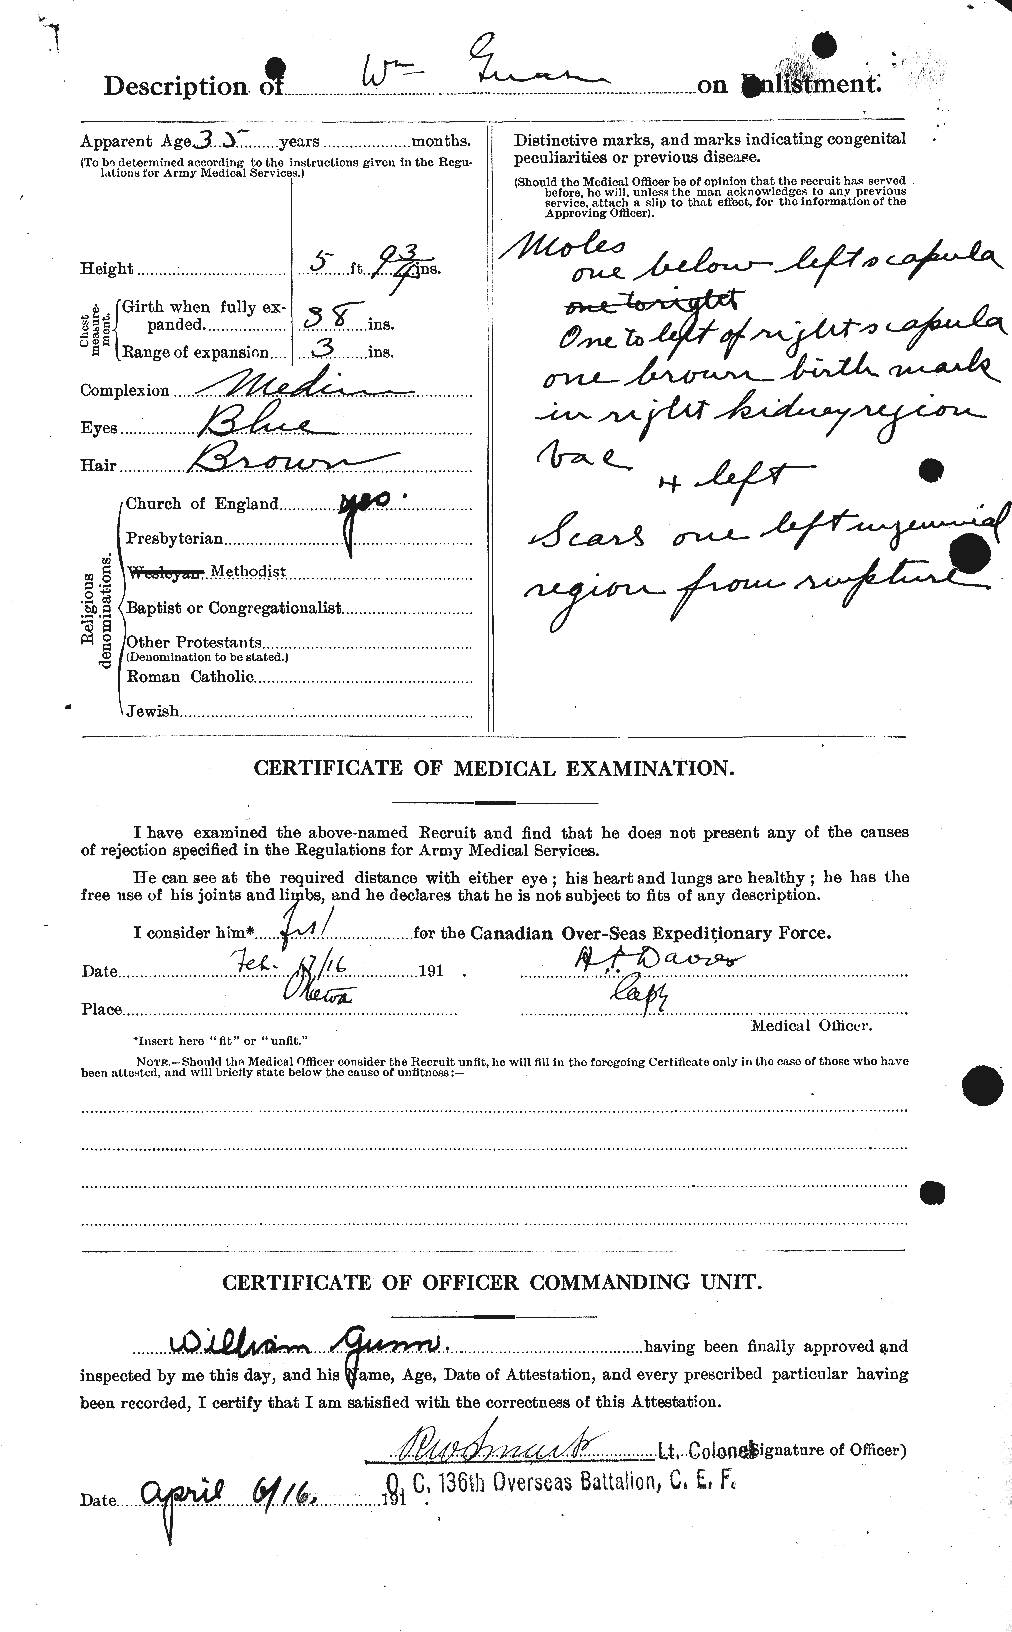 Personnel Records of the First World War - CEF 369353b